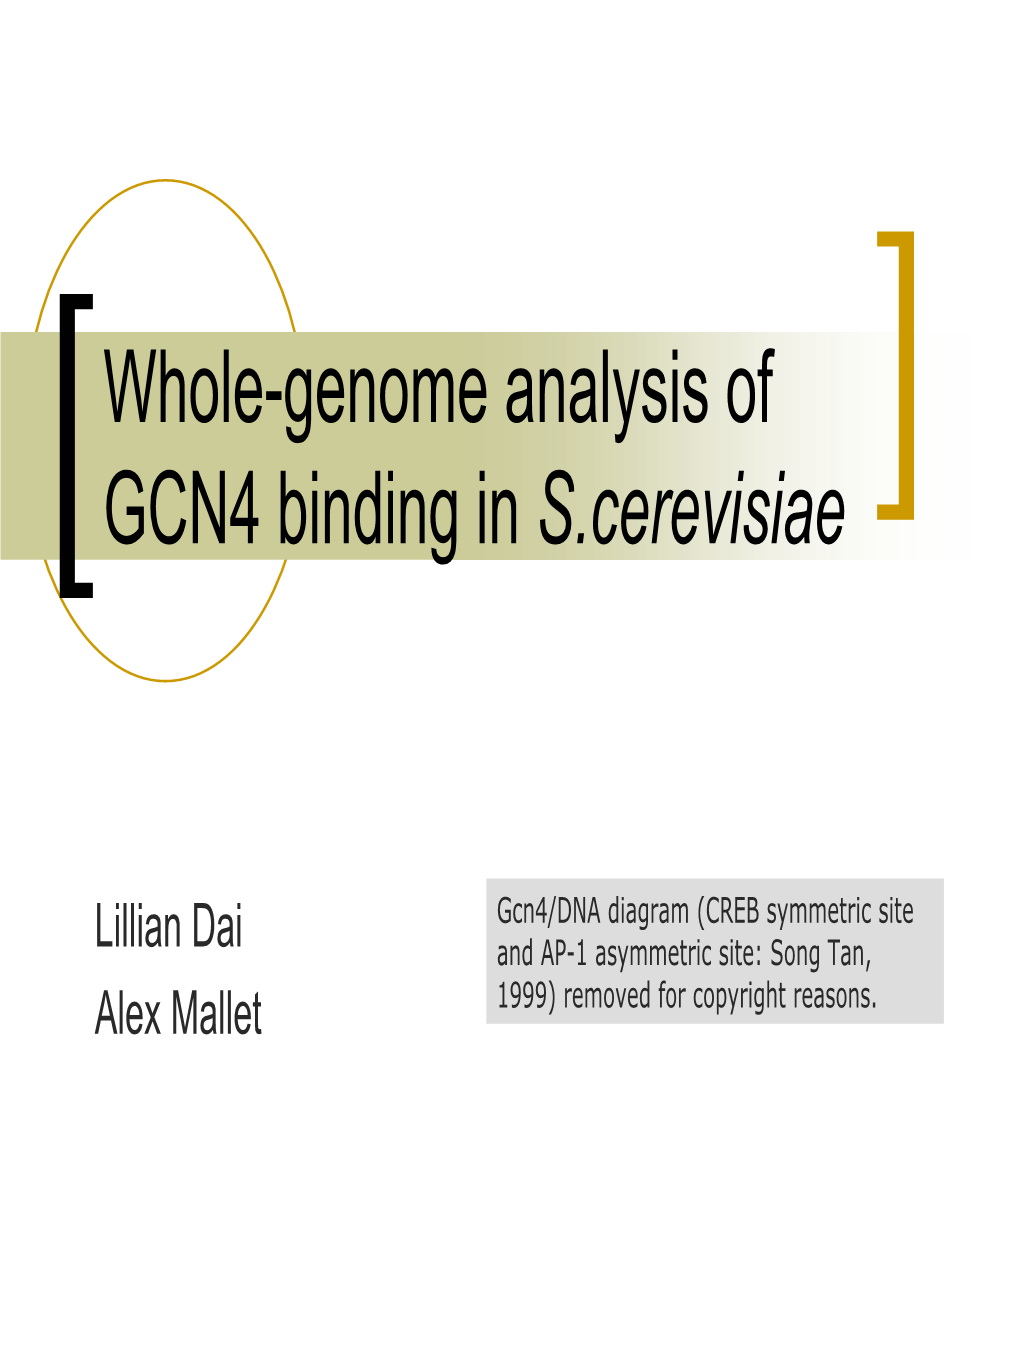 GCN4 Motif Discovery